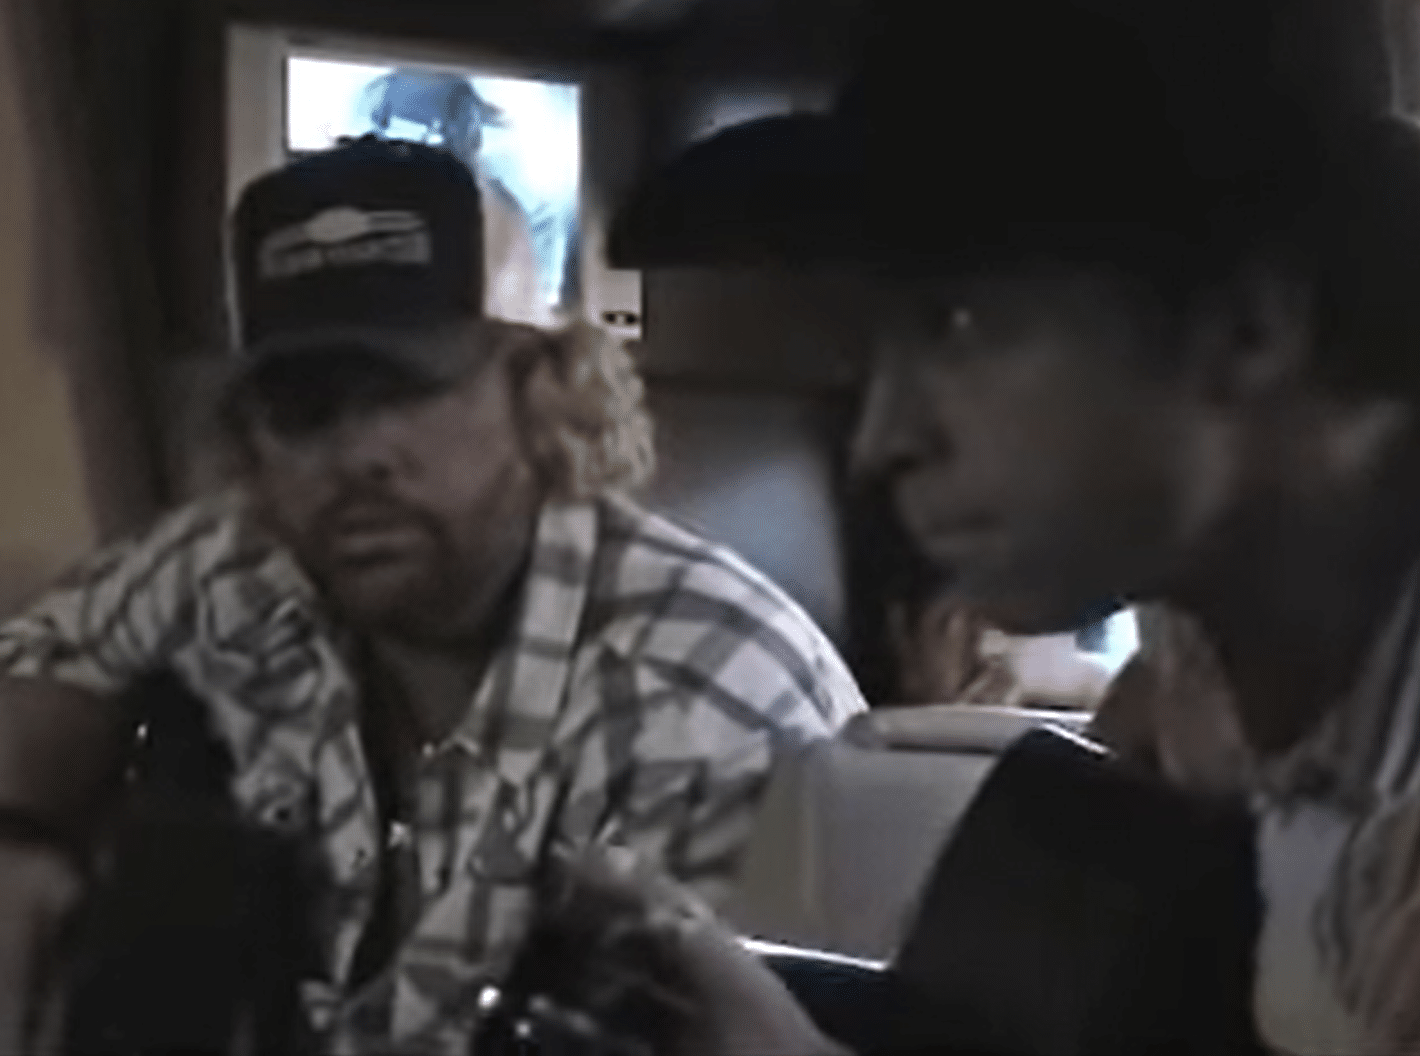 WATCH: Rare Footage Shows Merle Haggard, Toby Keith Singing On Tour Bus